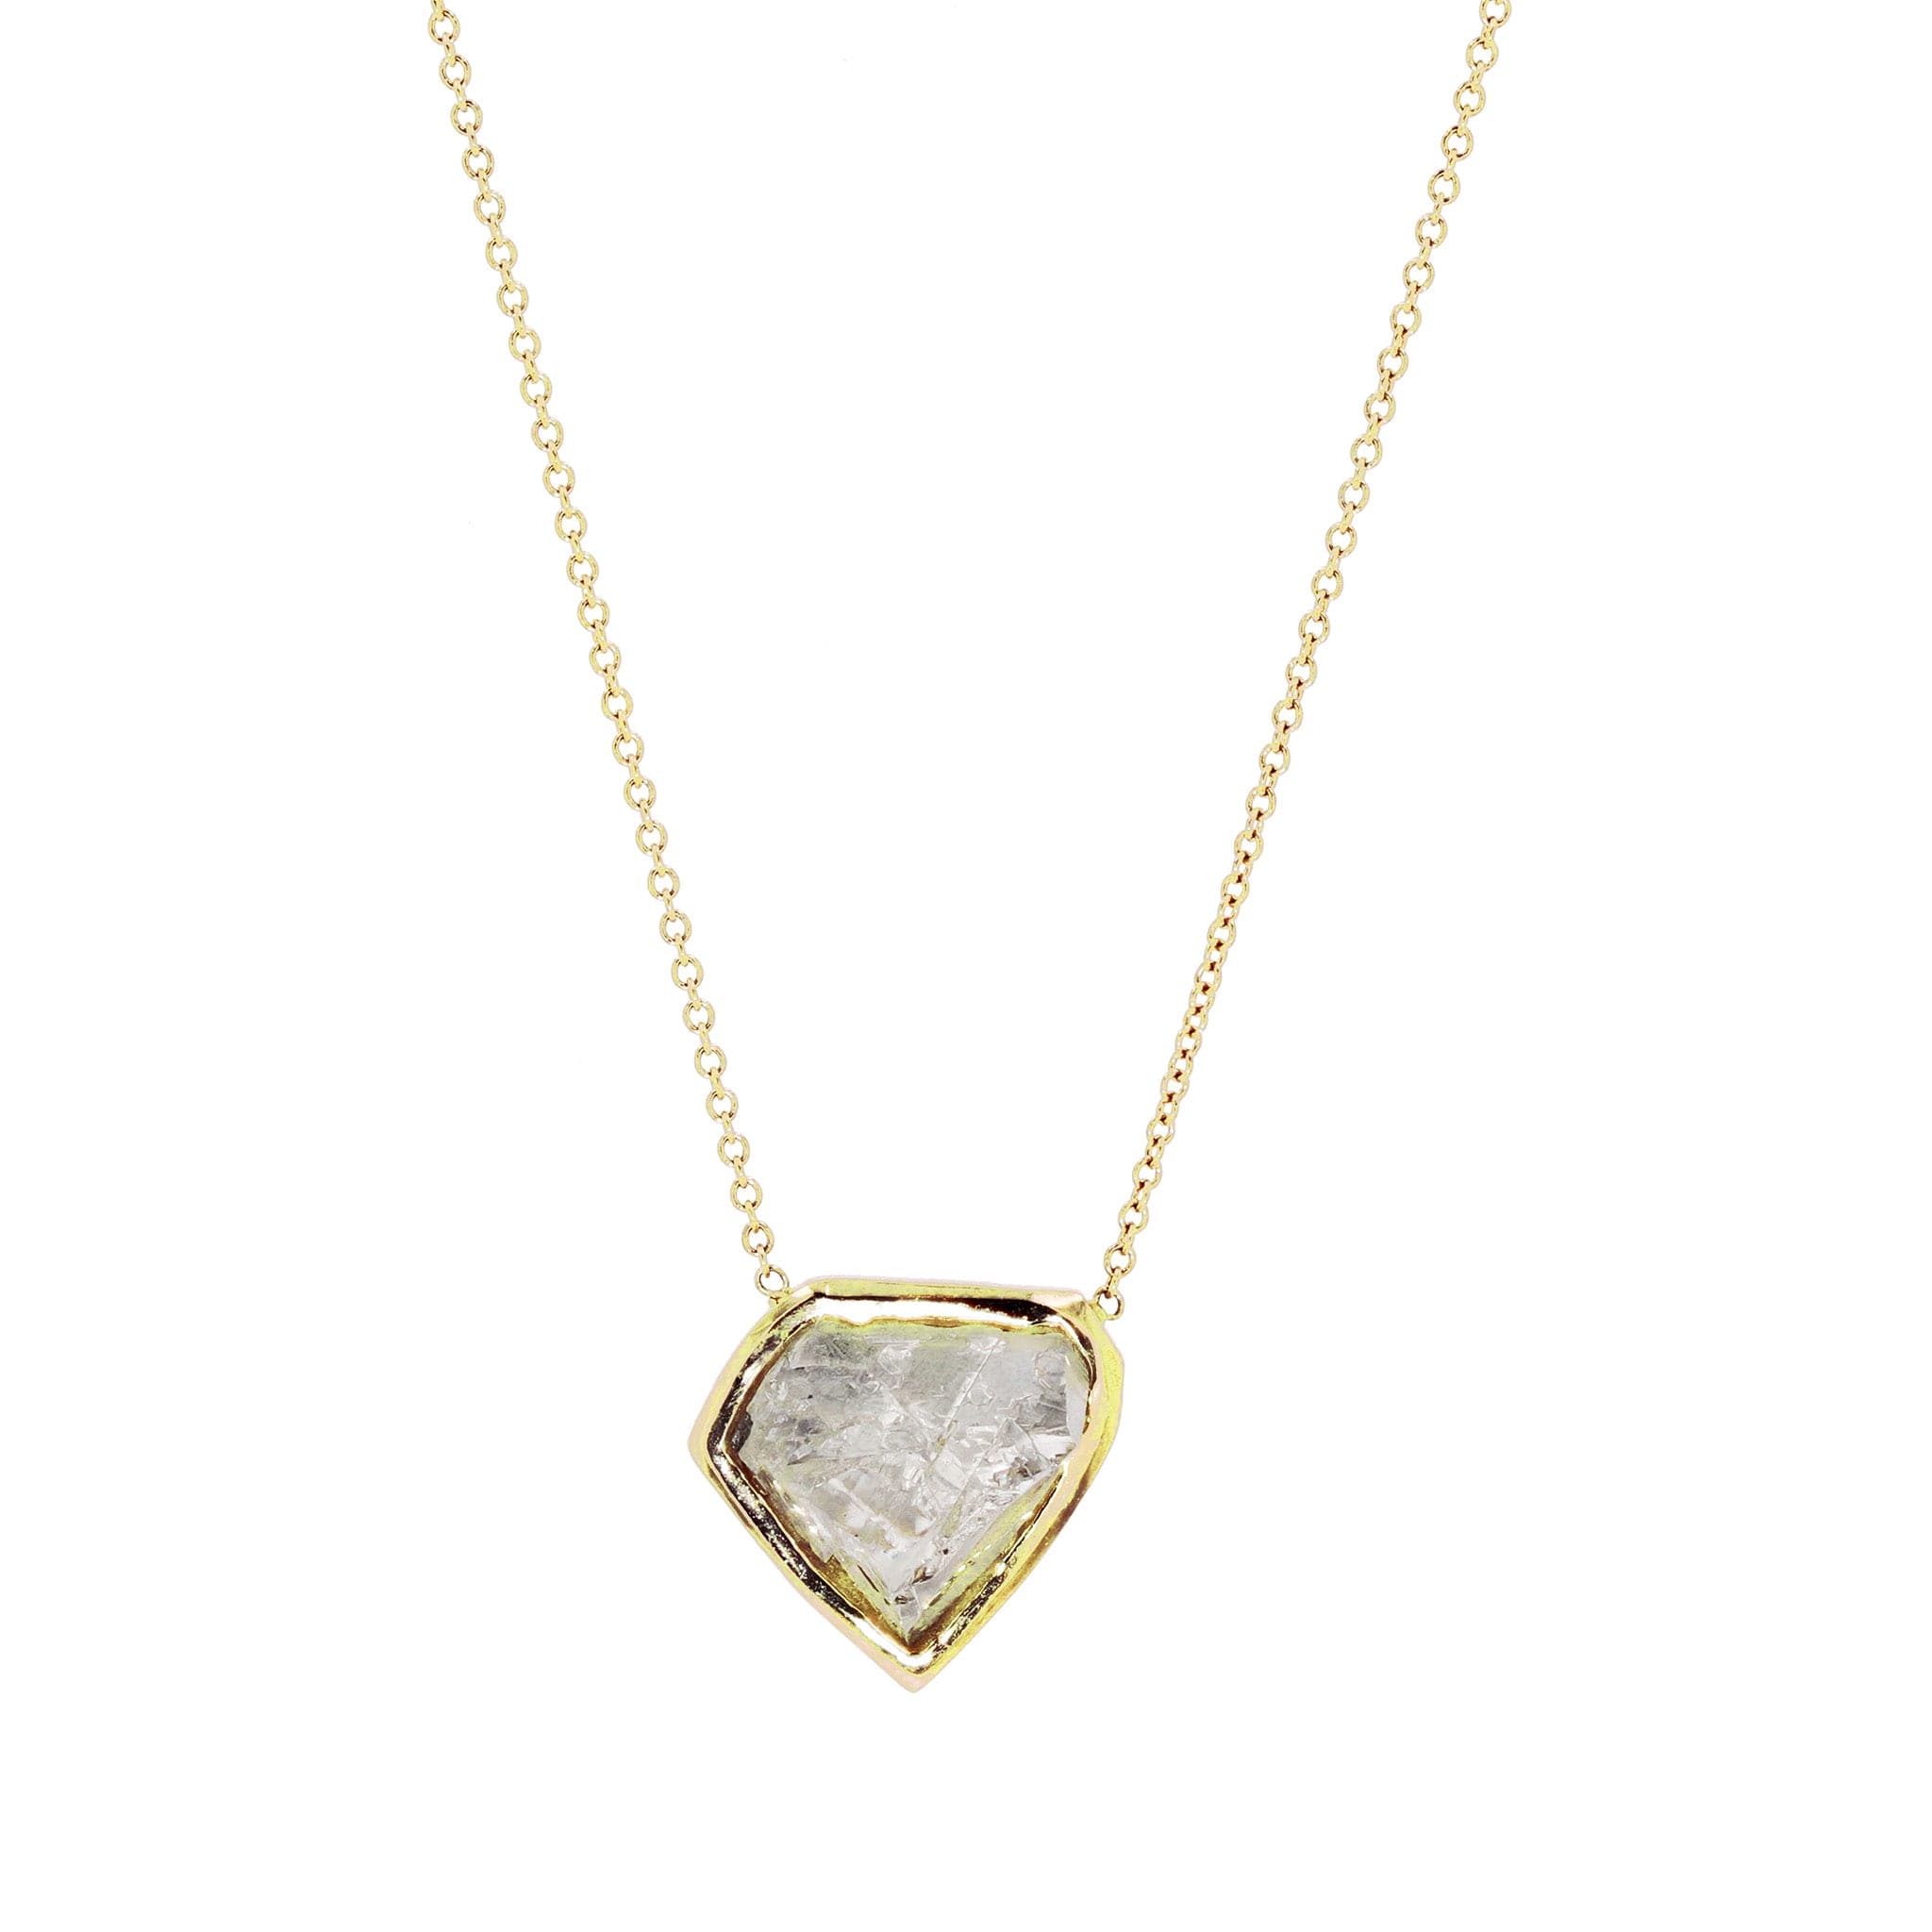 Solitaire necklace with a 0.50 carat diamond in yellow gold - BAUNAT